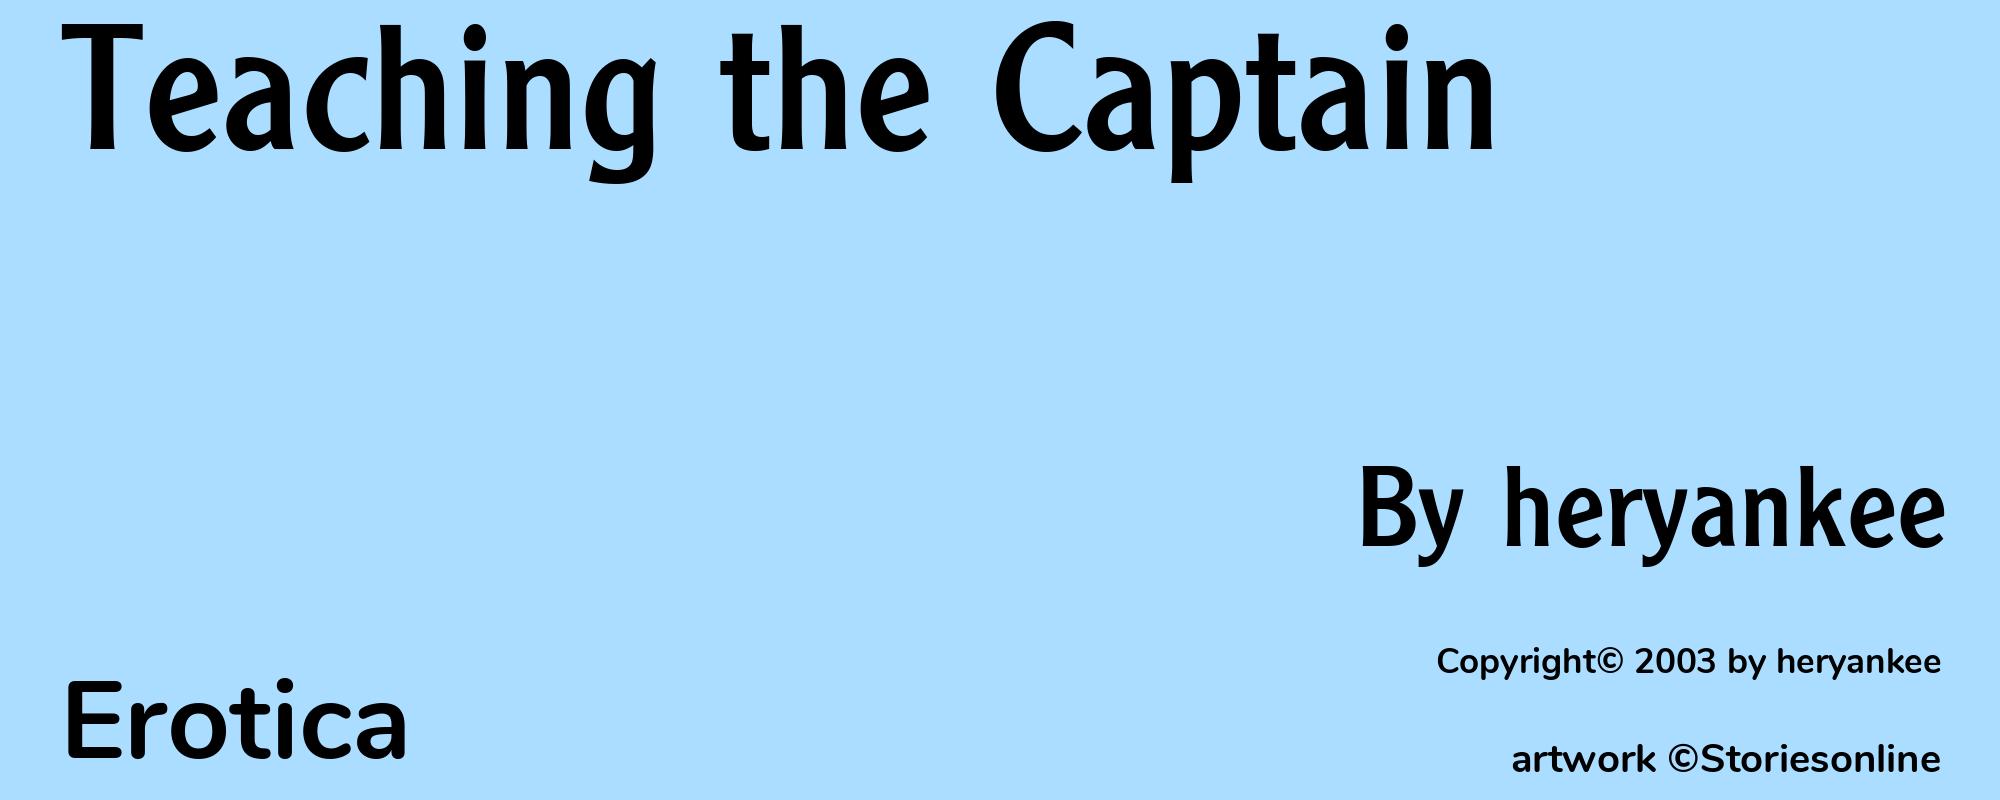 Teaching the Captain - Cover